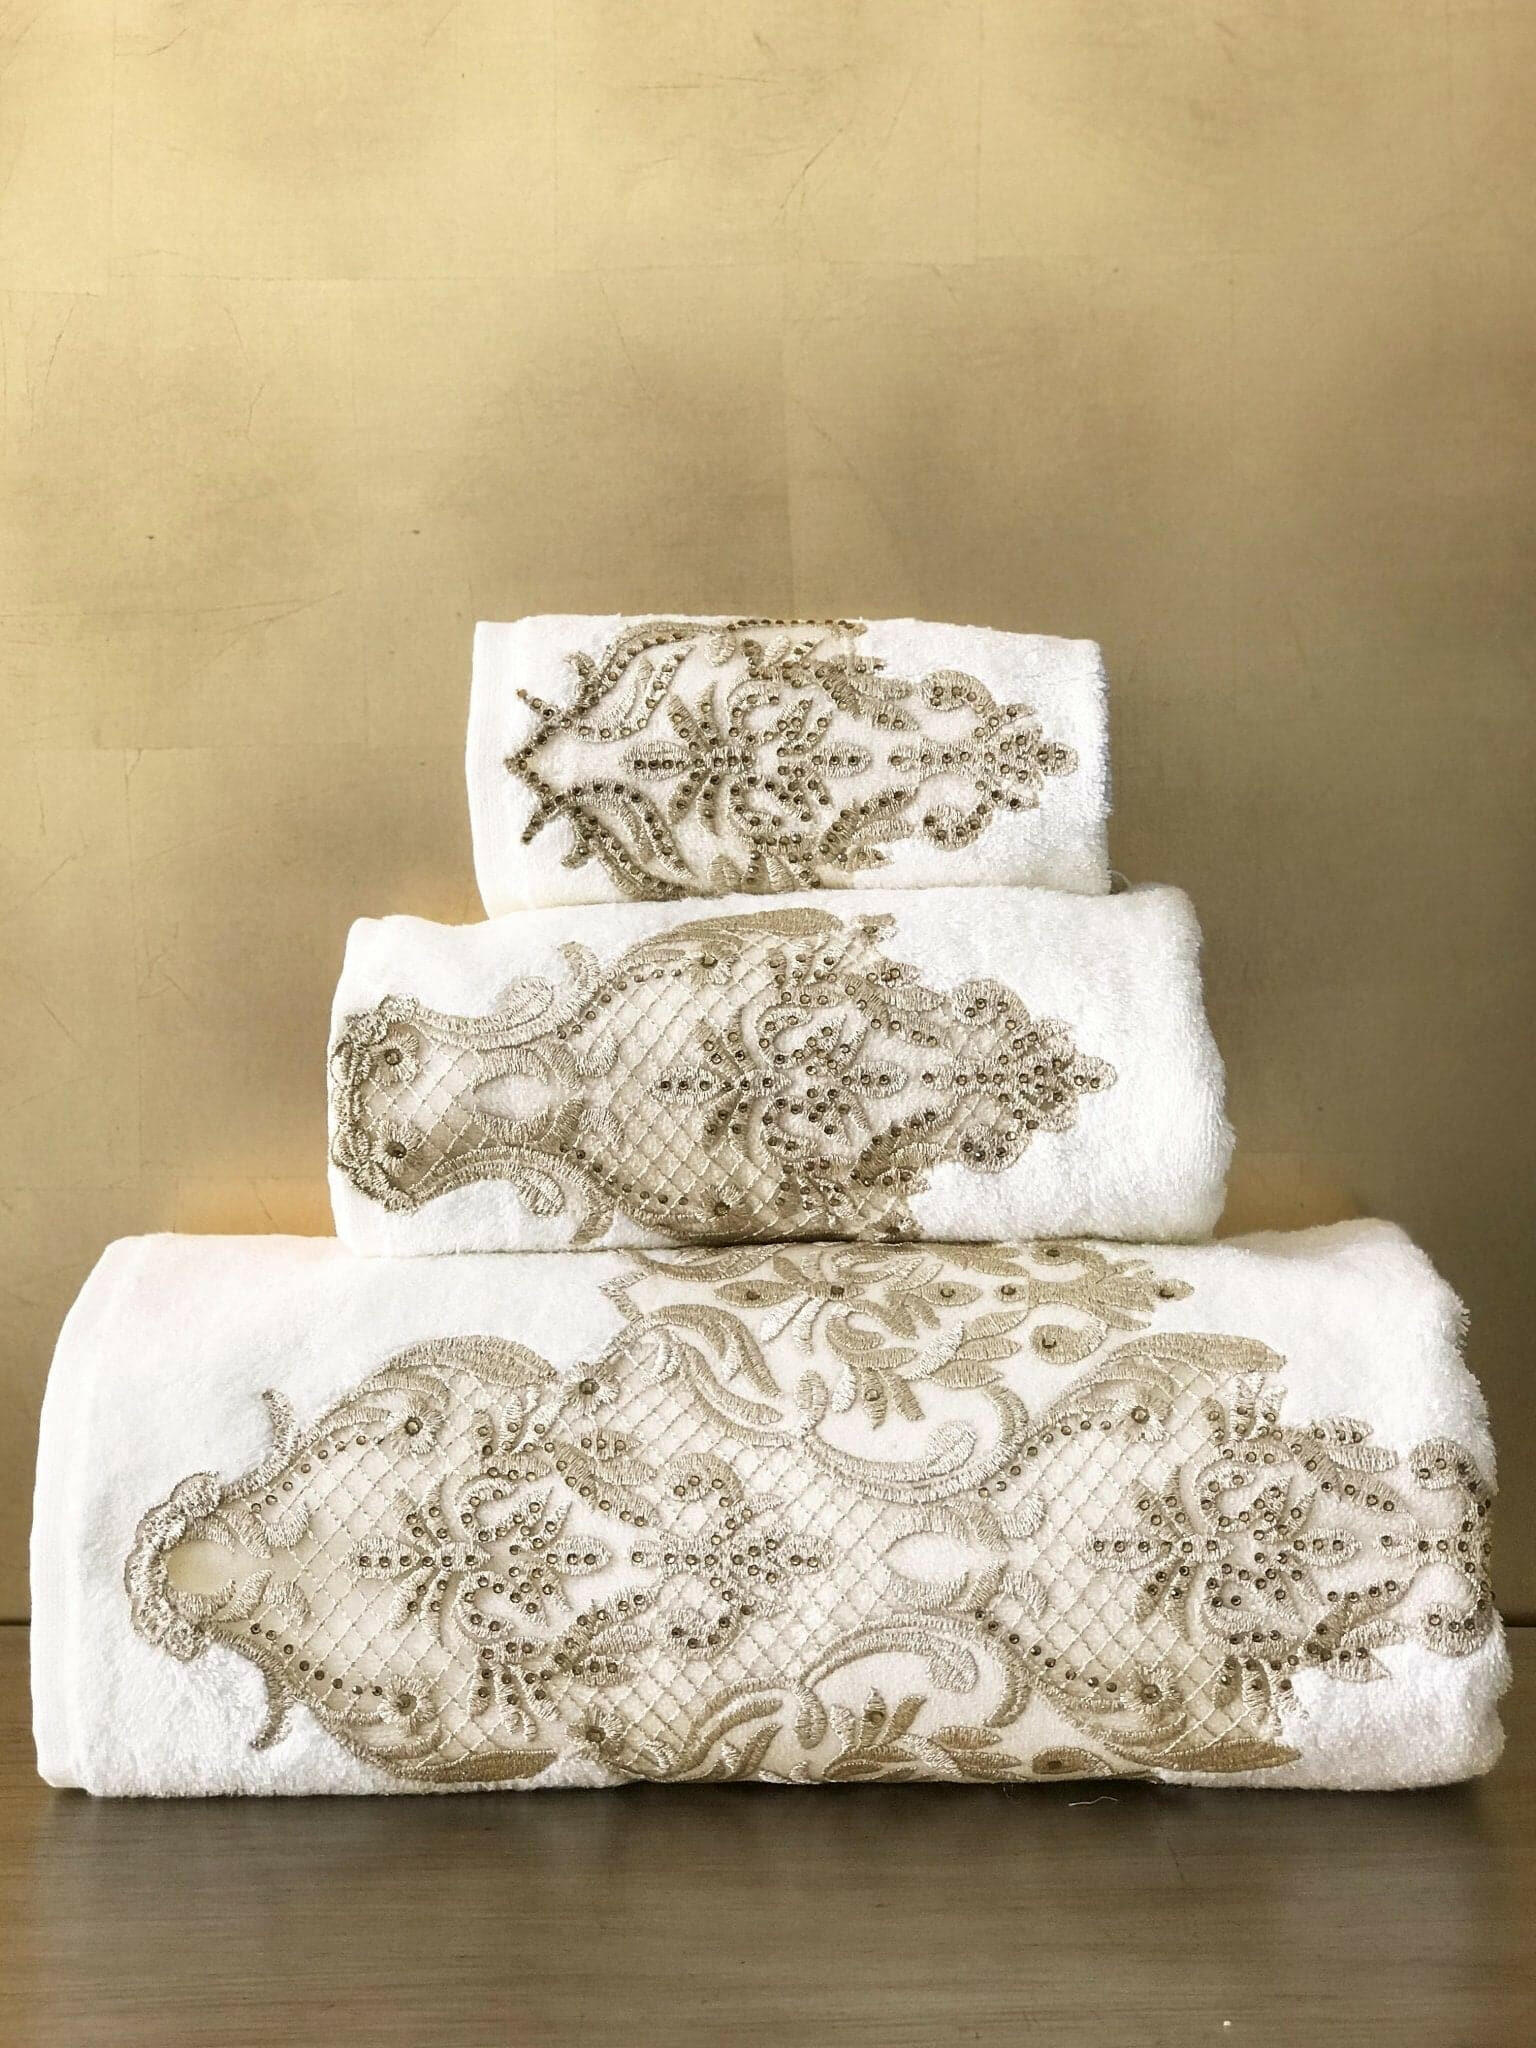 Ece European Style Luxury Embroidery Lace 3 Piece Elegant Bathroom Towel Set by Creative Home, Gold Color Embroidery with Crystals